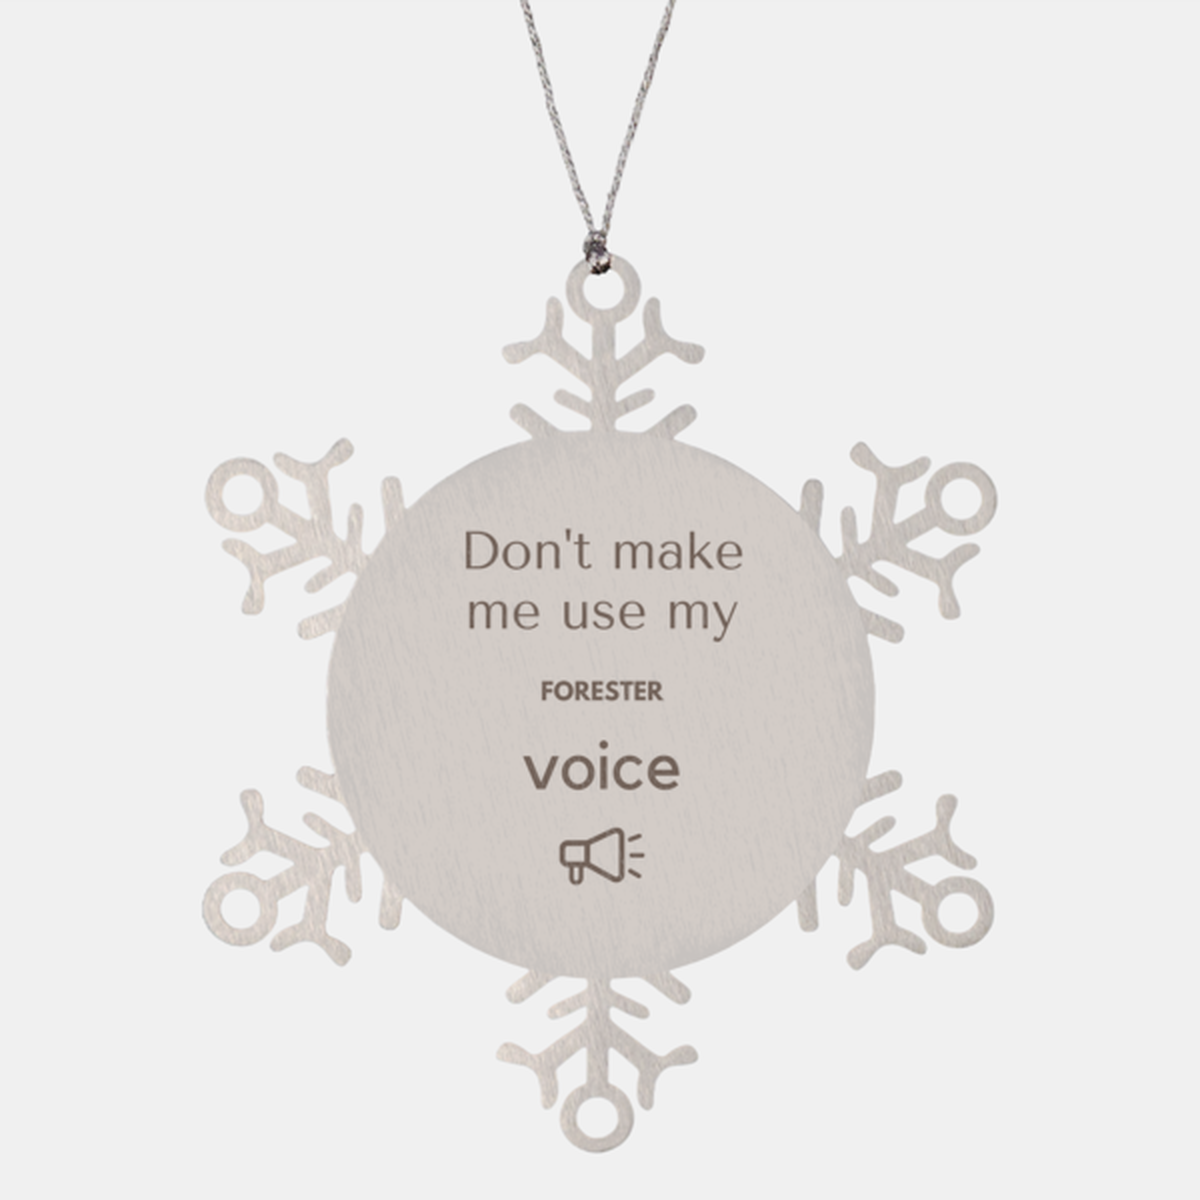 Don't make me use my Forester voice, Sarcasm Forester Ornament Gifts, Christmas Forester Snowflake Ornament Unique Gifts For Forester Coworkers, Men, Women, Colleague, Friends